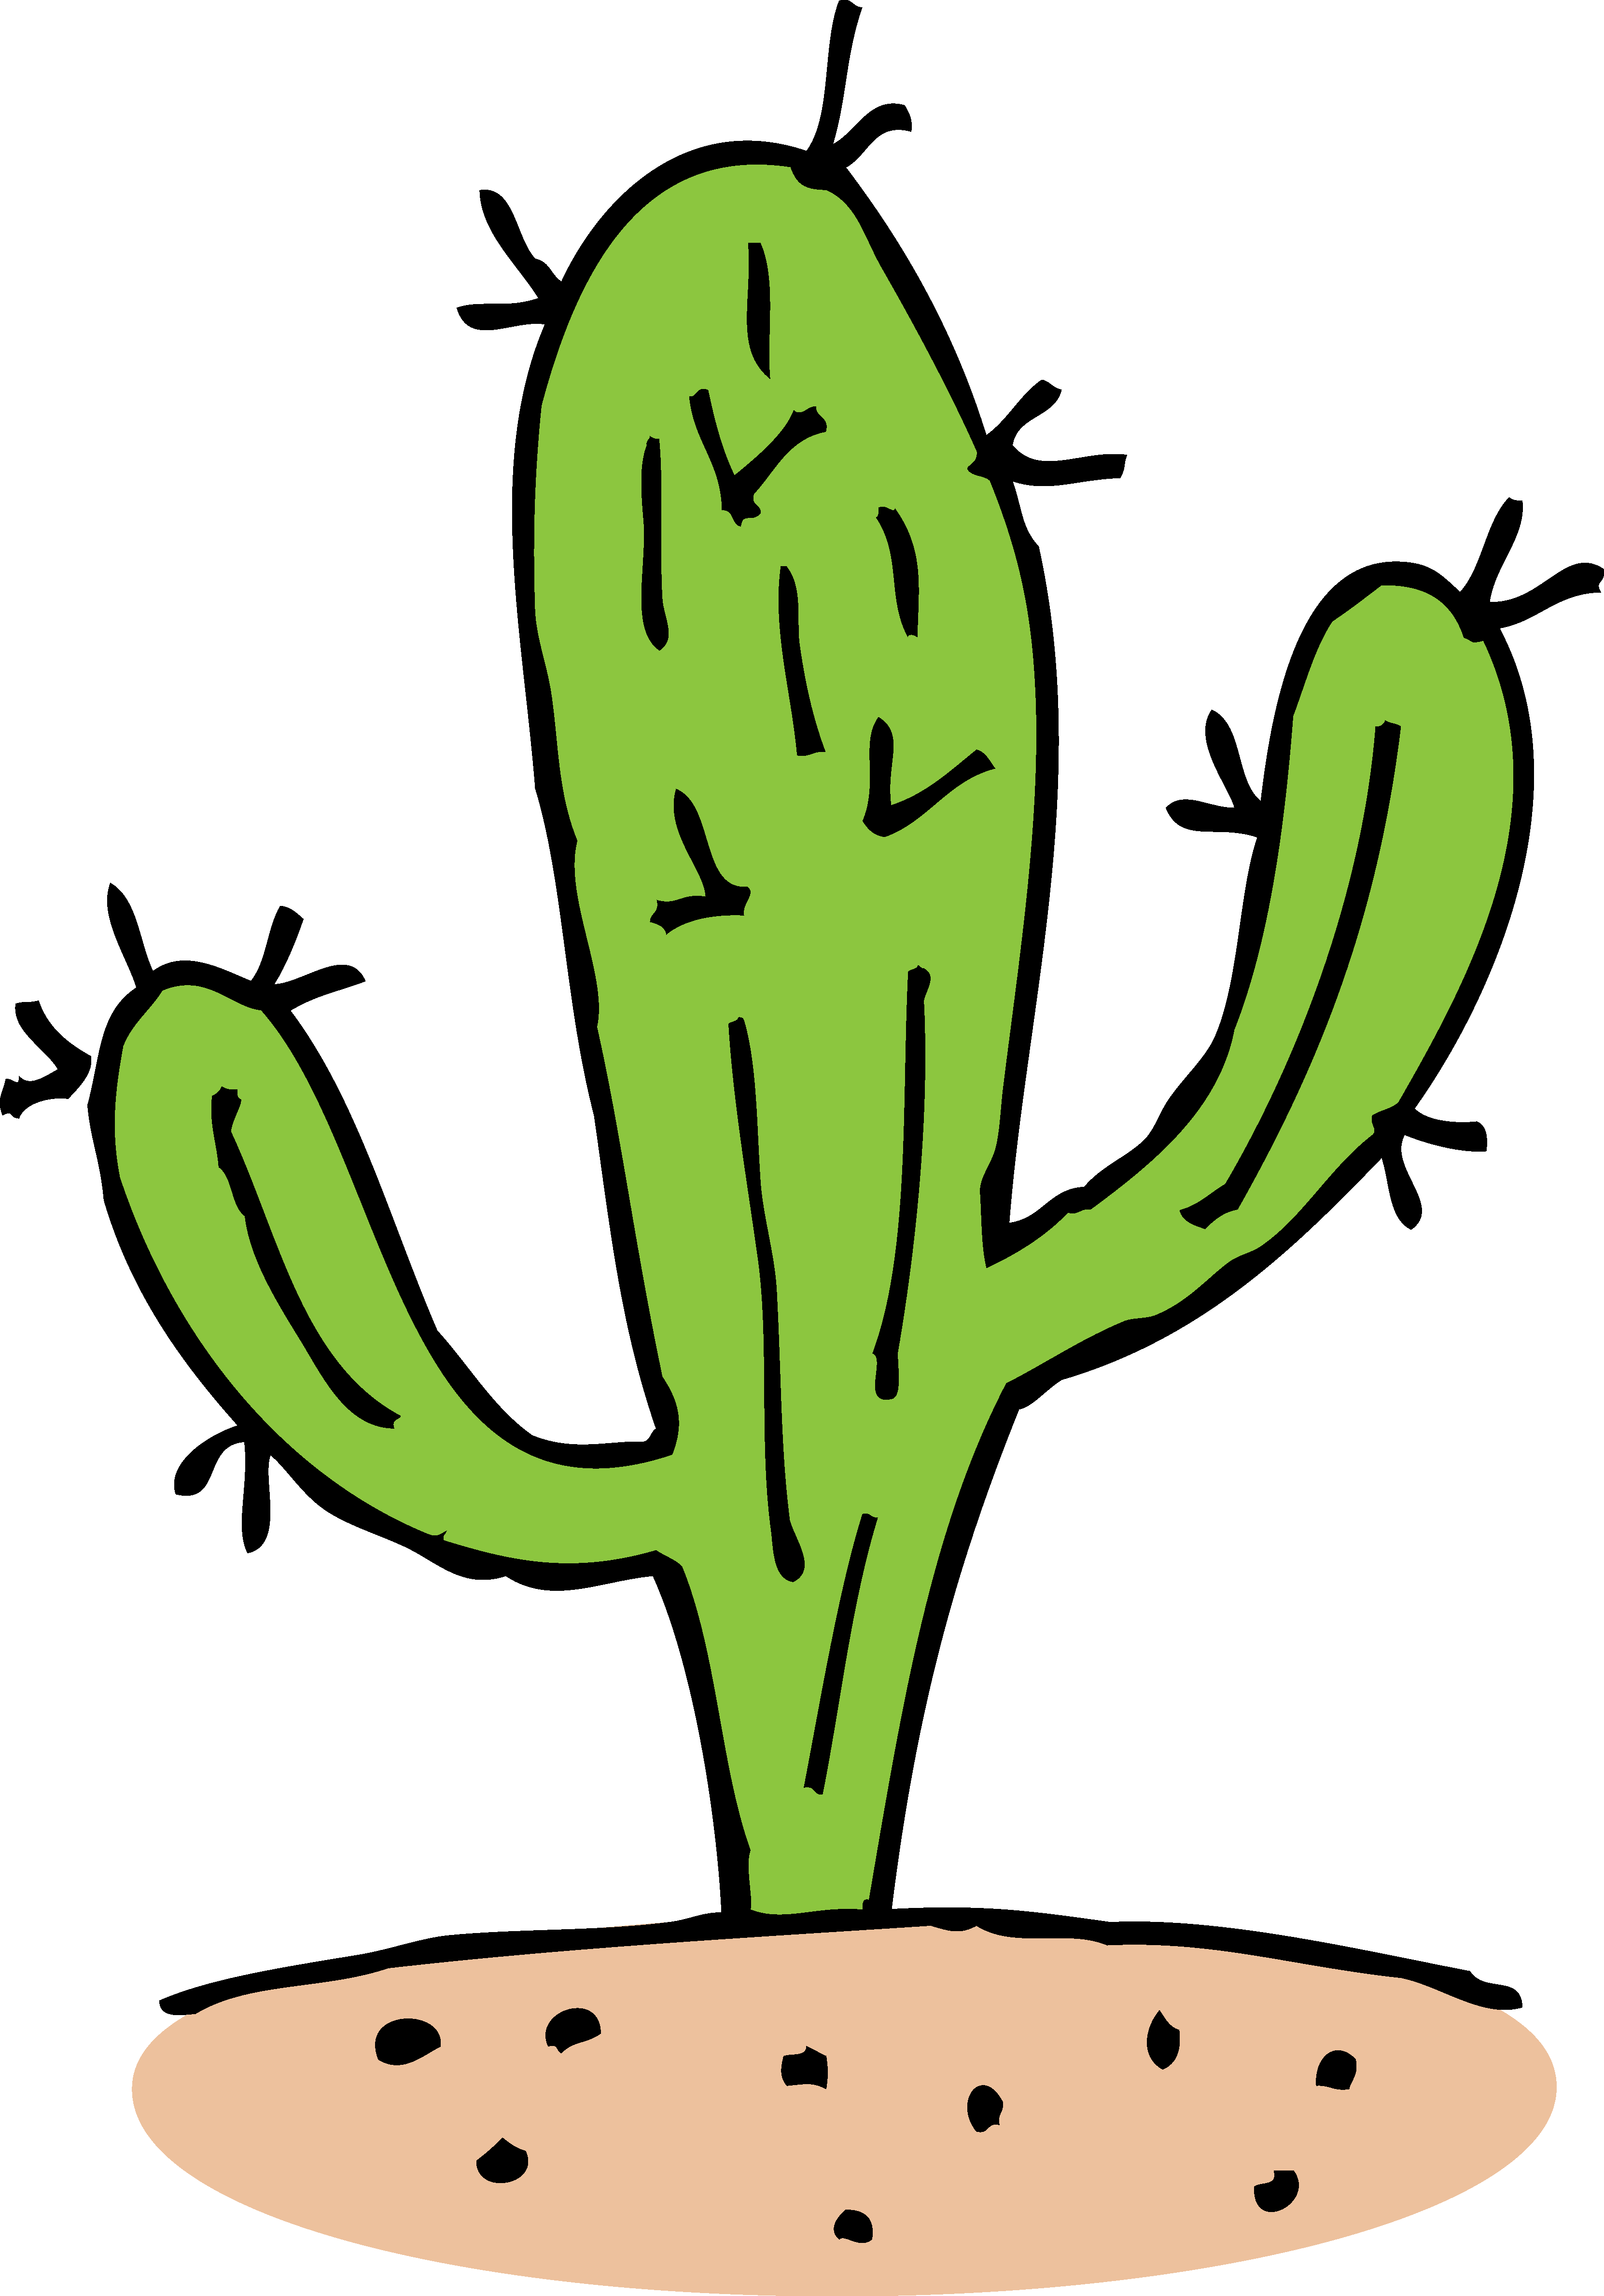 Animated Cactus Cliparts Bring The Southwest To Your Designs